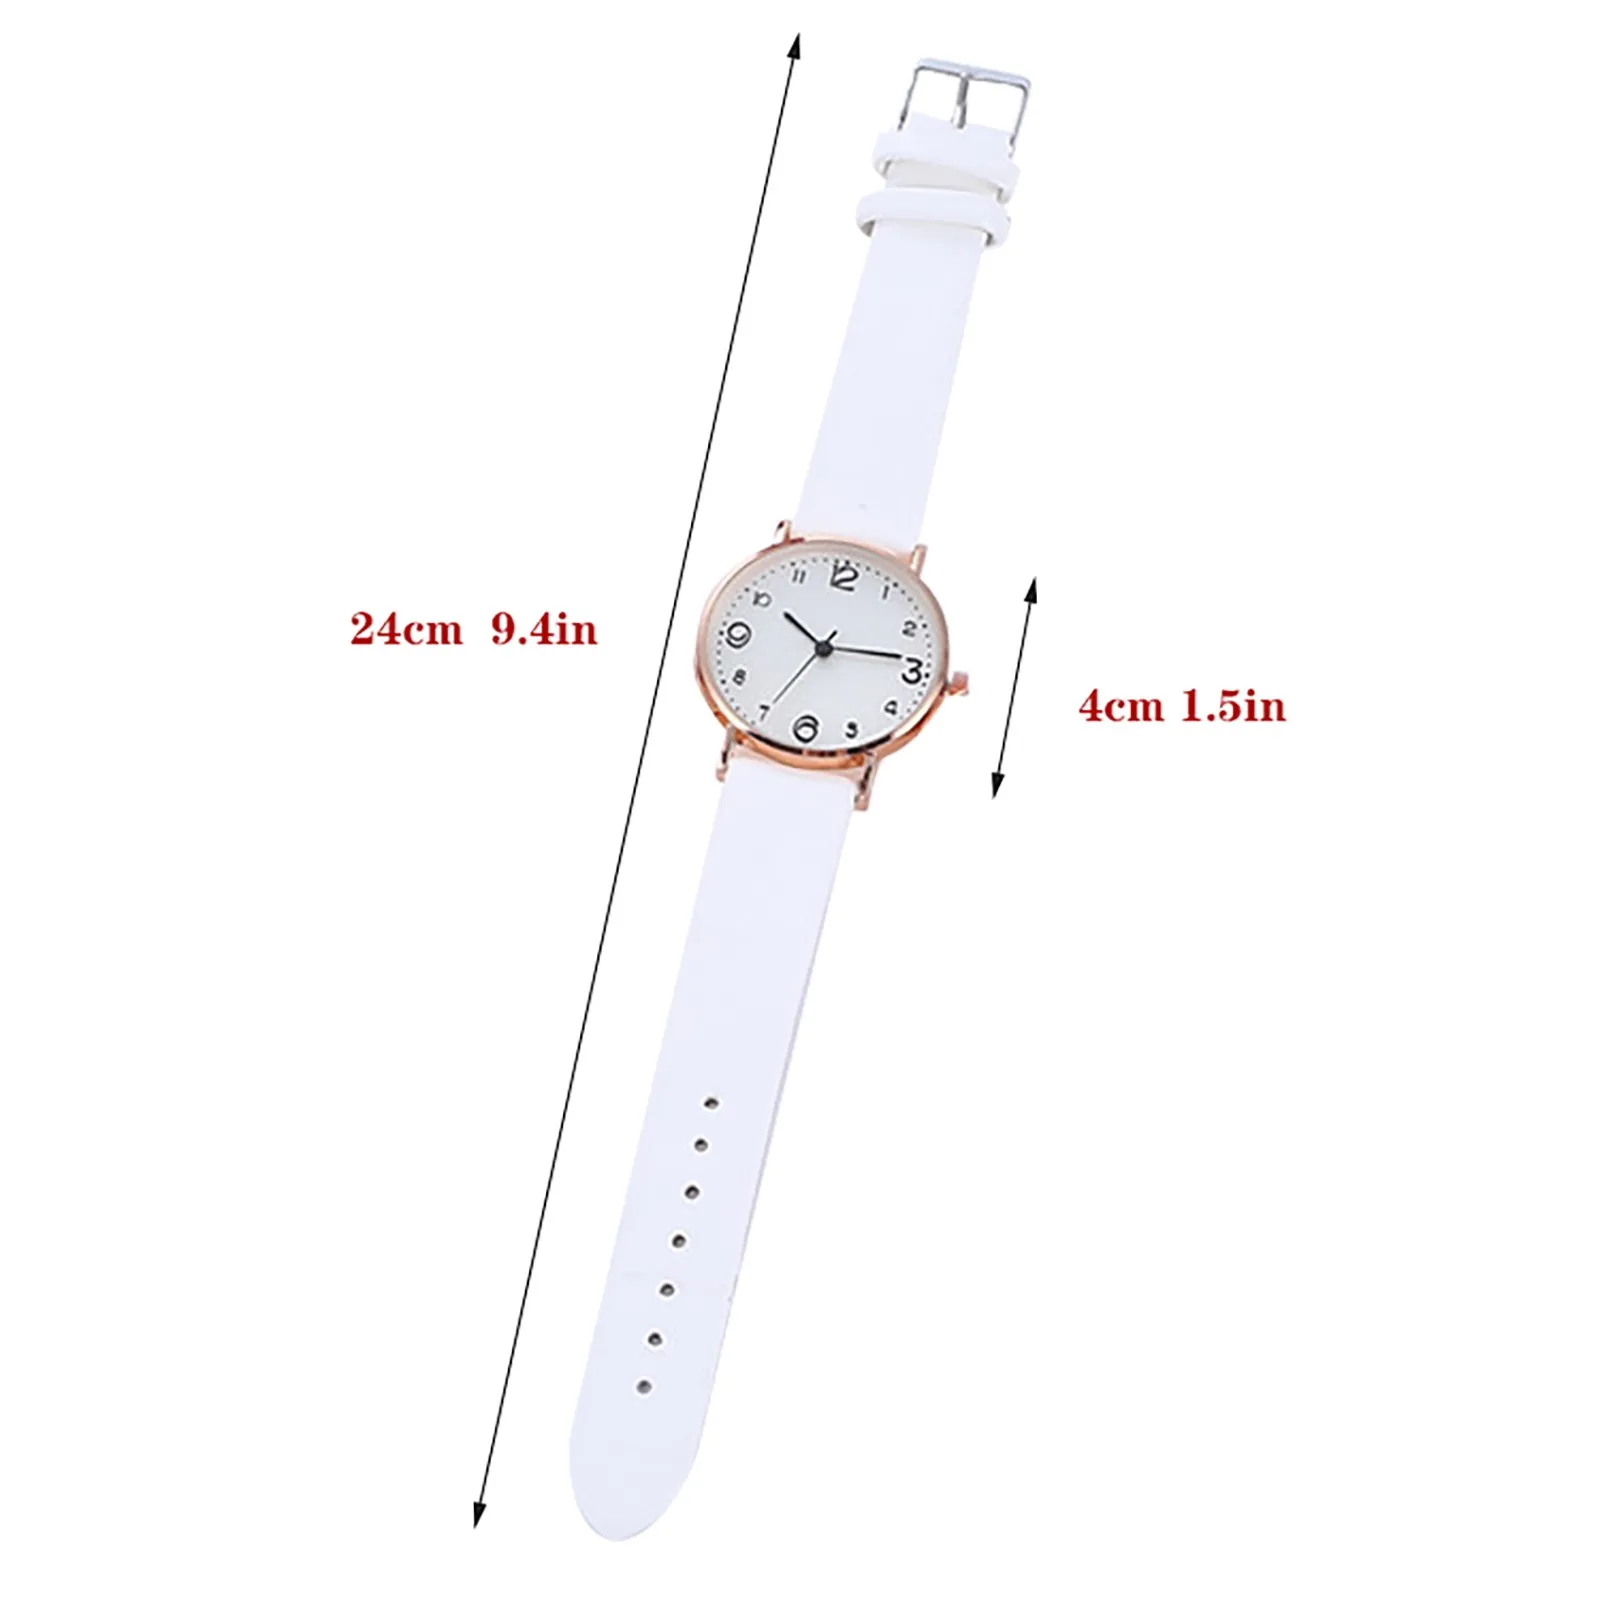 2021 New LED Simple Fashion Design Luxury Quartz Wrist Watches Leather Band Stainless Steel Dial Casual Bracele Watch Girl GIft